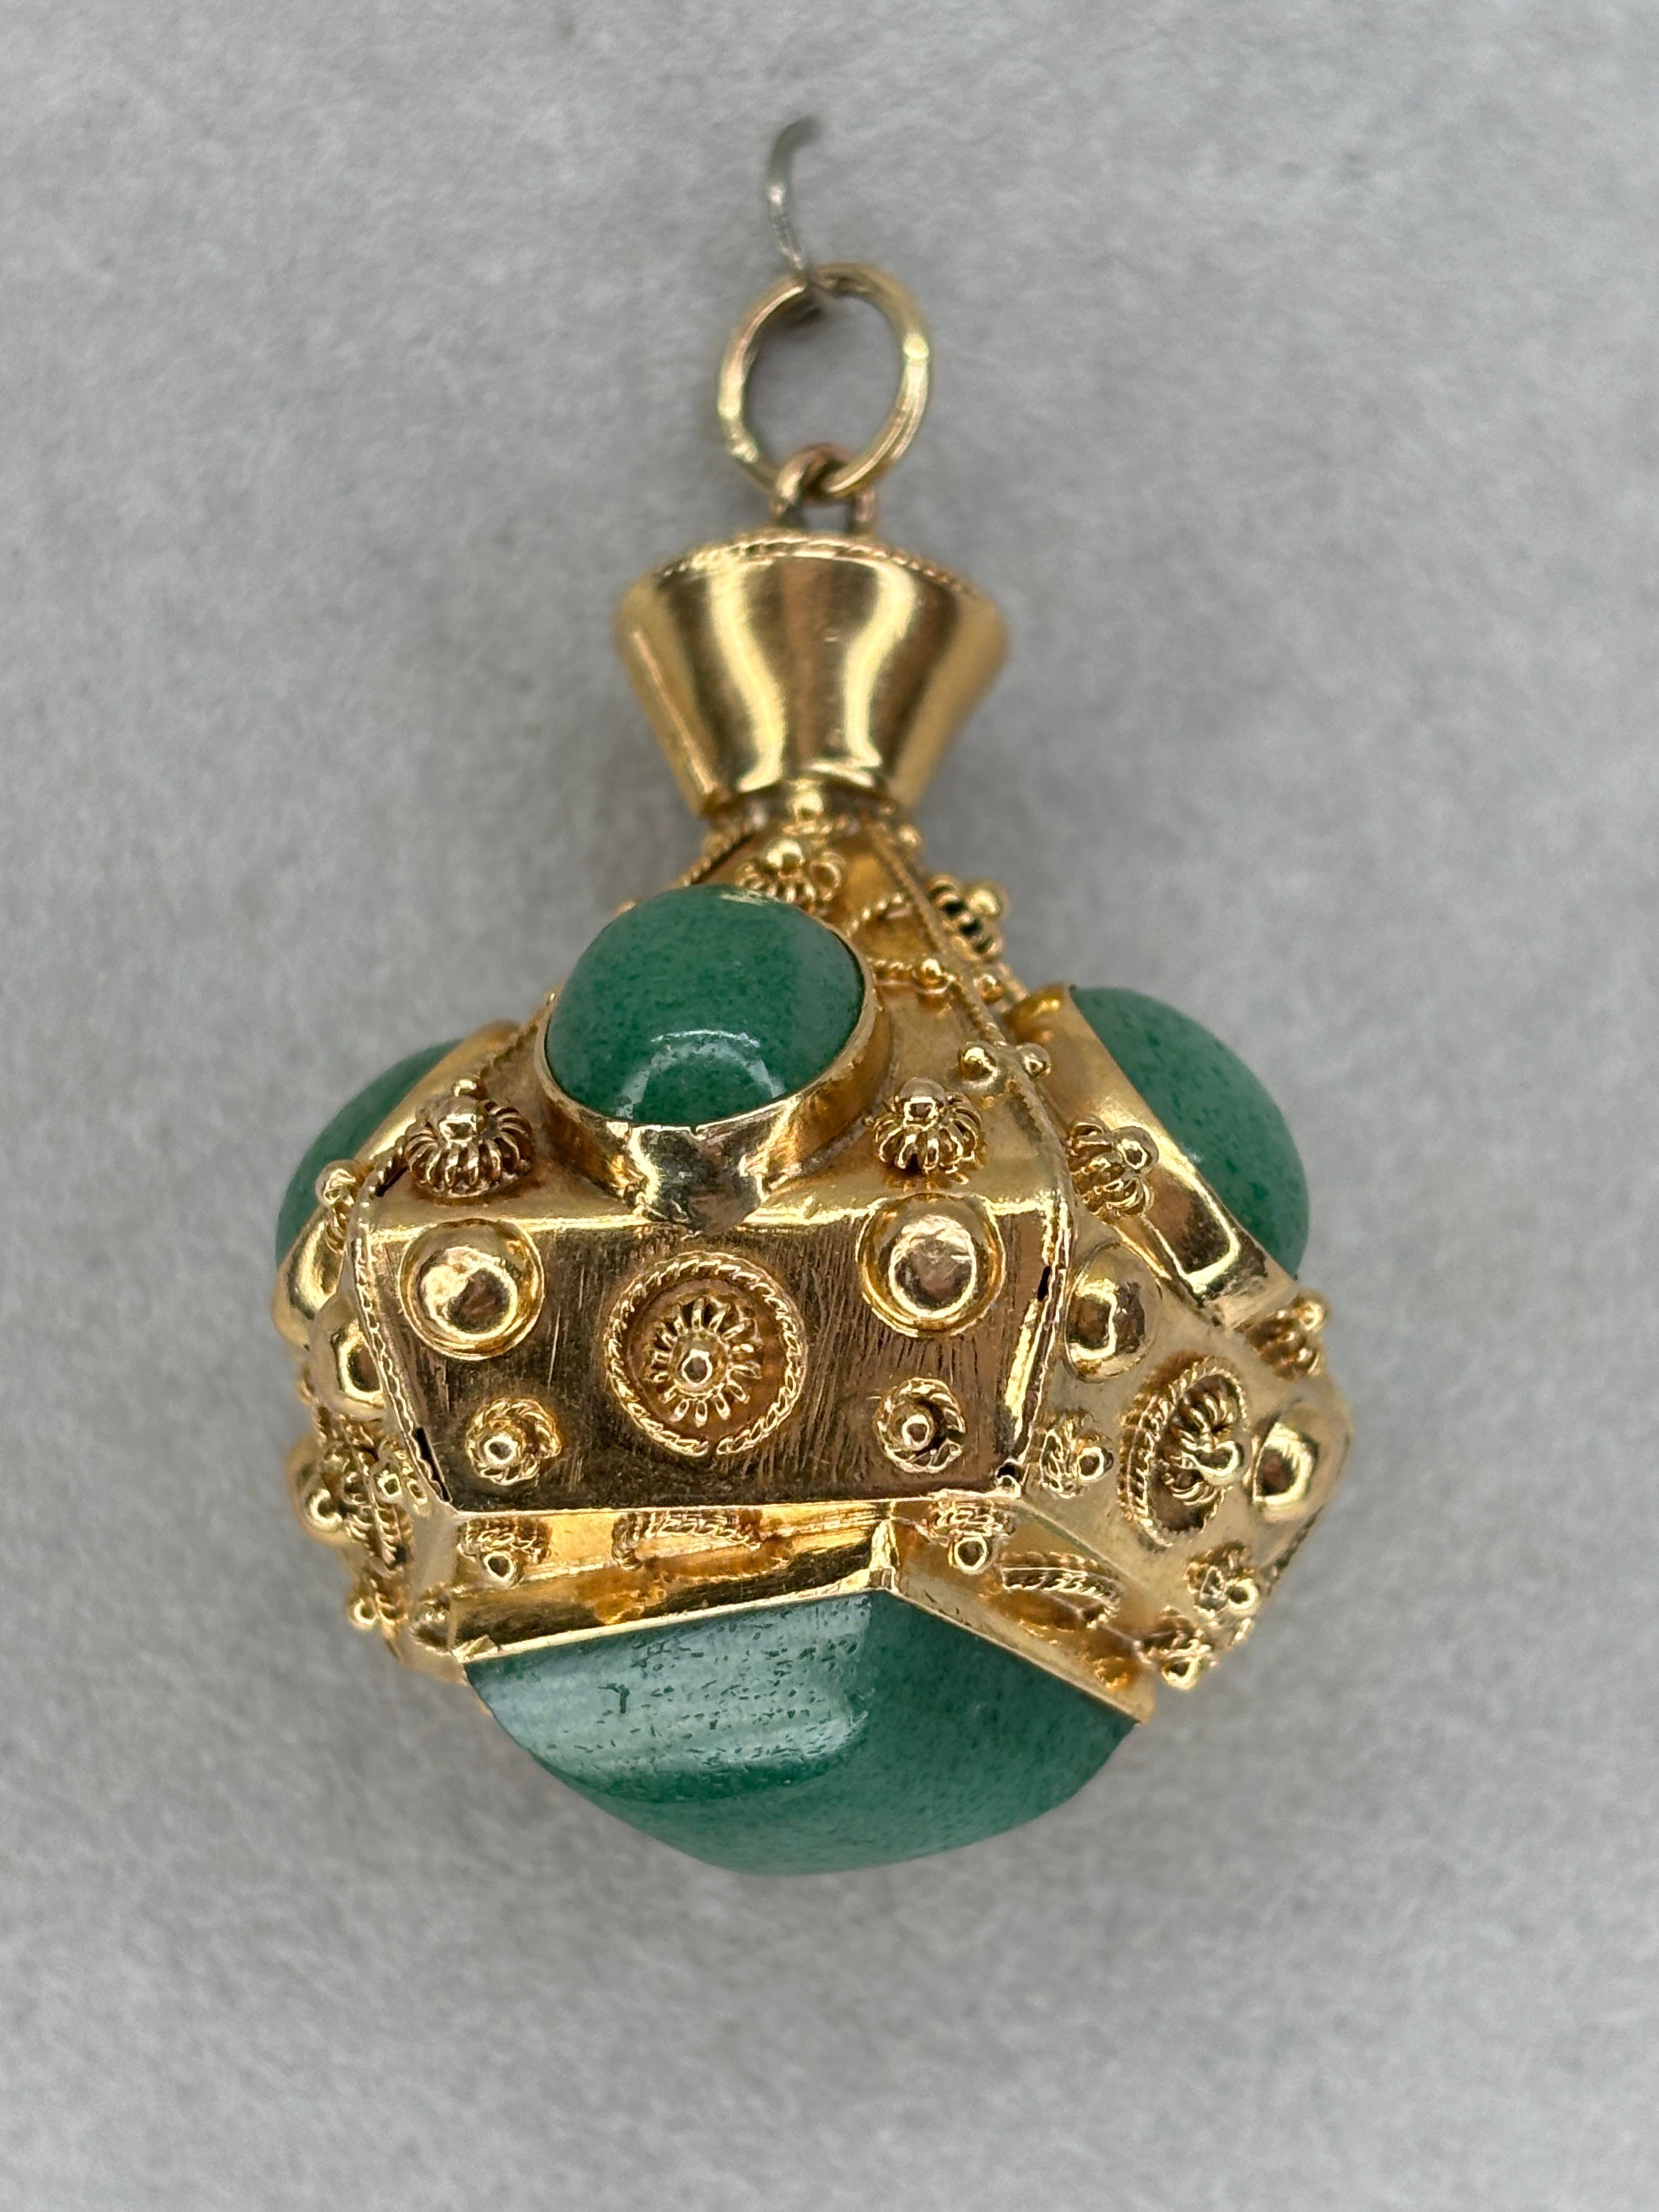 Large Italian 18k Gold Aventurine Etruscan Revival Watch Fob Pendant Charm For Sale 2